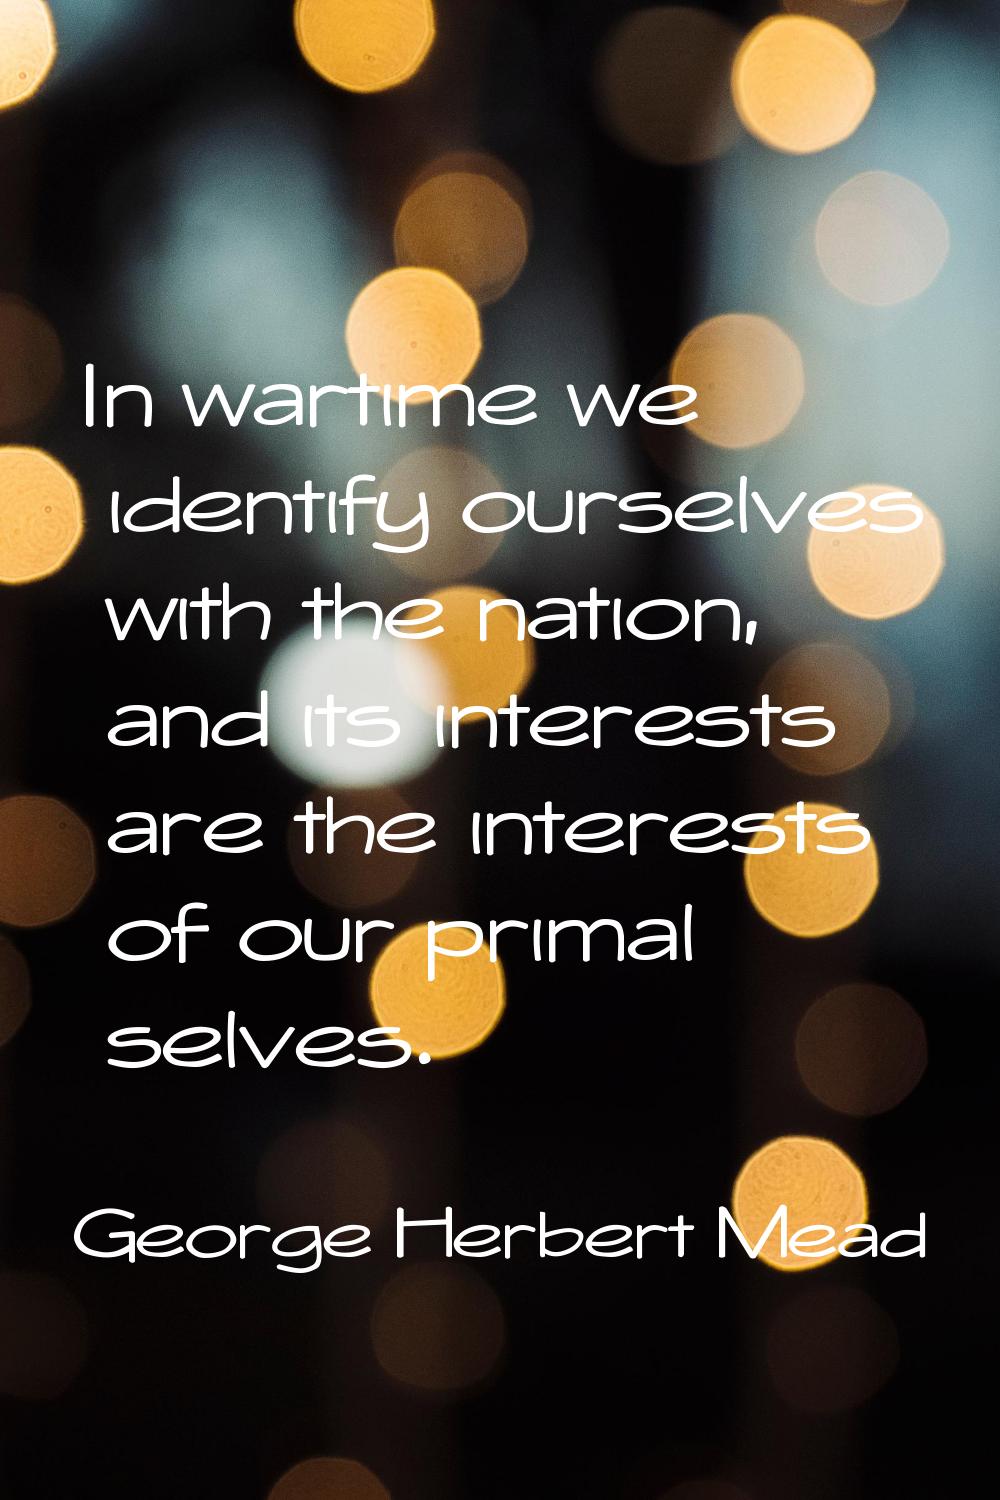 In wartime we identify ourselves with the nation, and its interests are the interests of our primal